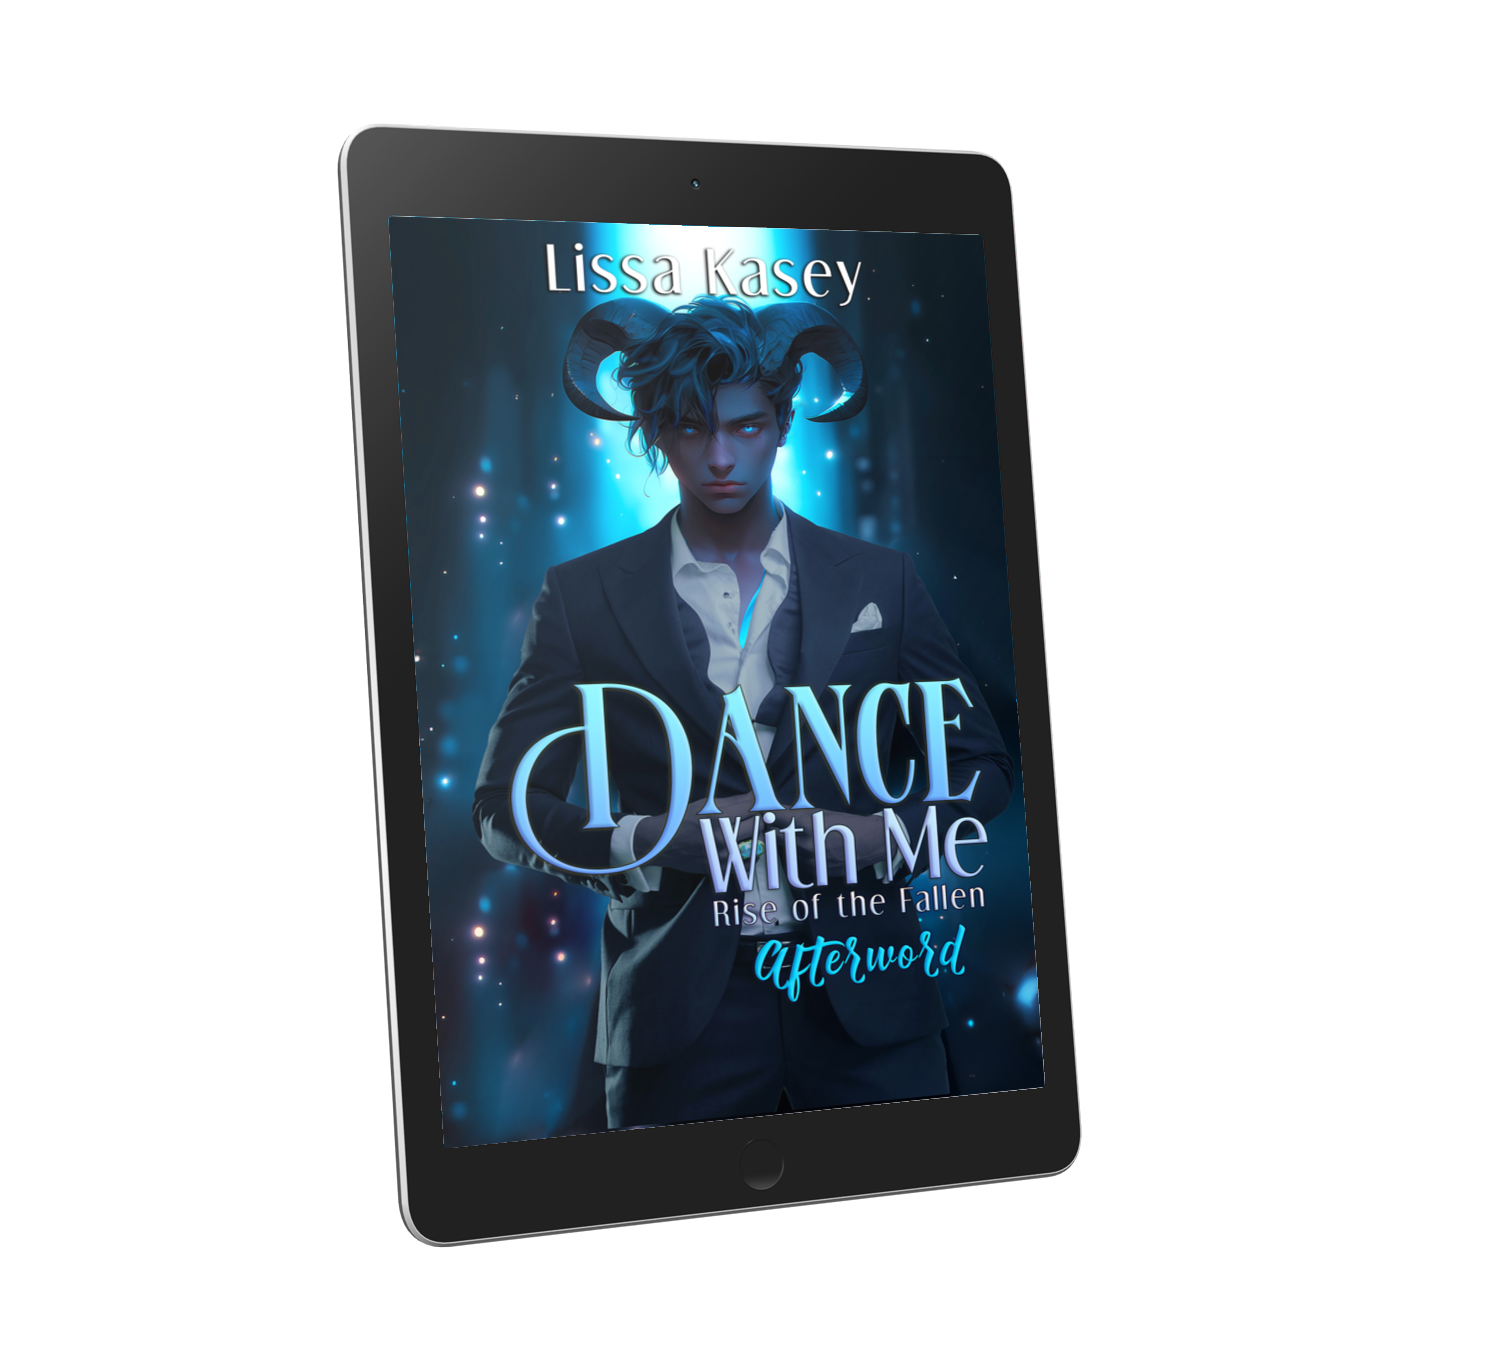 Dance with Me by Lissa Kasey Rise of the Fallen Afterword